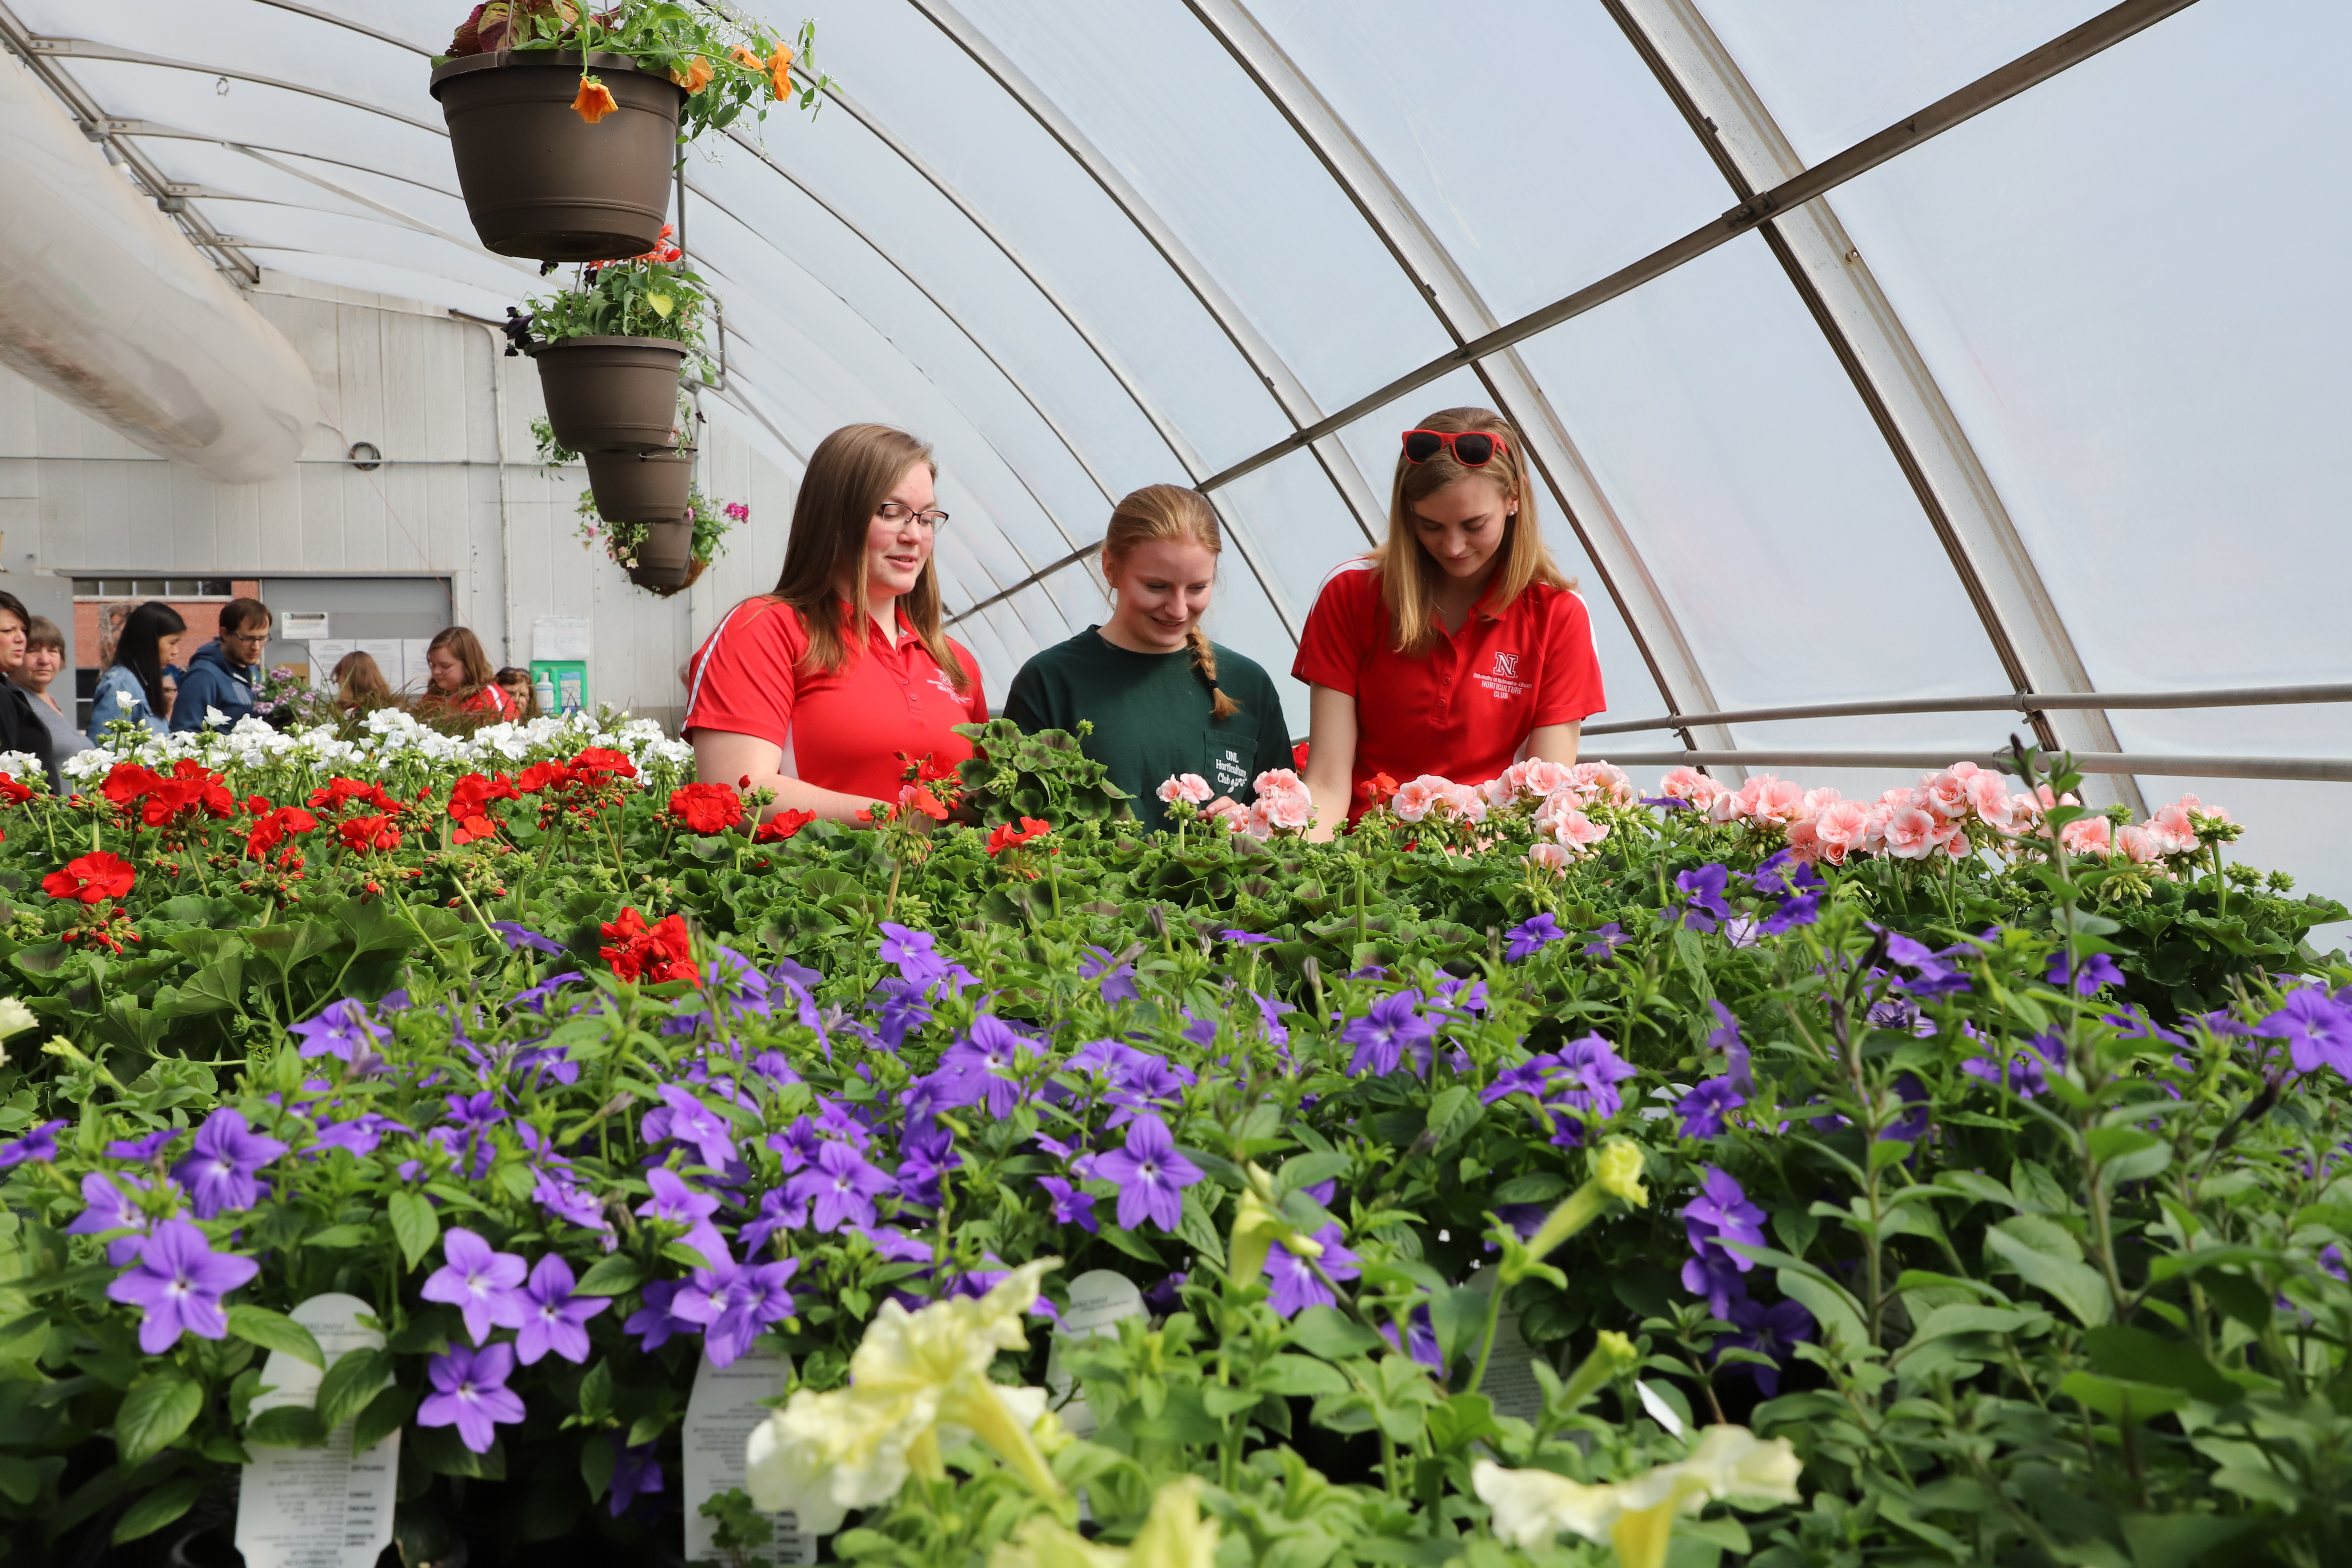 Plants are grown and cared for by Horticulture Club members in the greenhouses during the spring semester on the University of Nebraska–Lincoln East Campus.  Lana Johnson  |  Agronomy and Horticulture